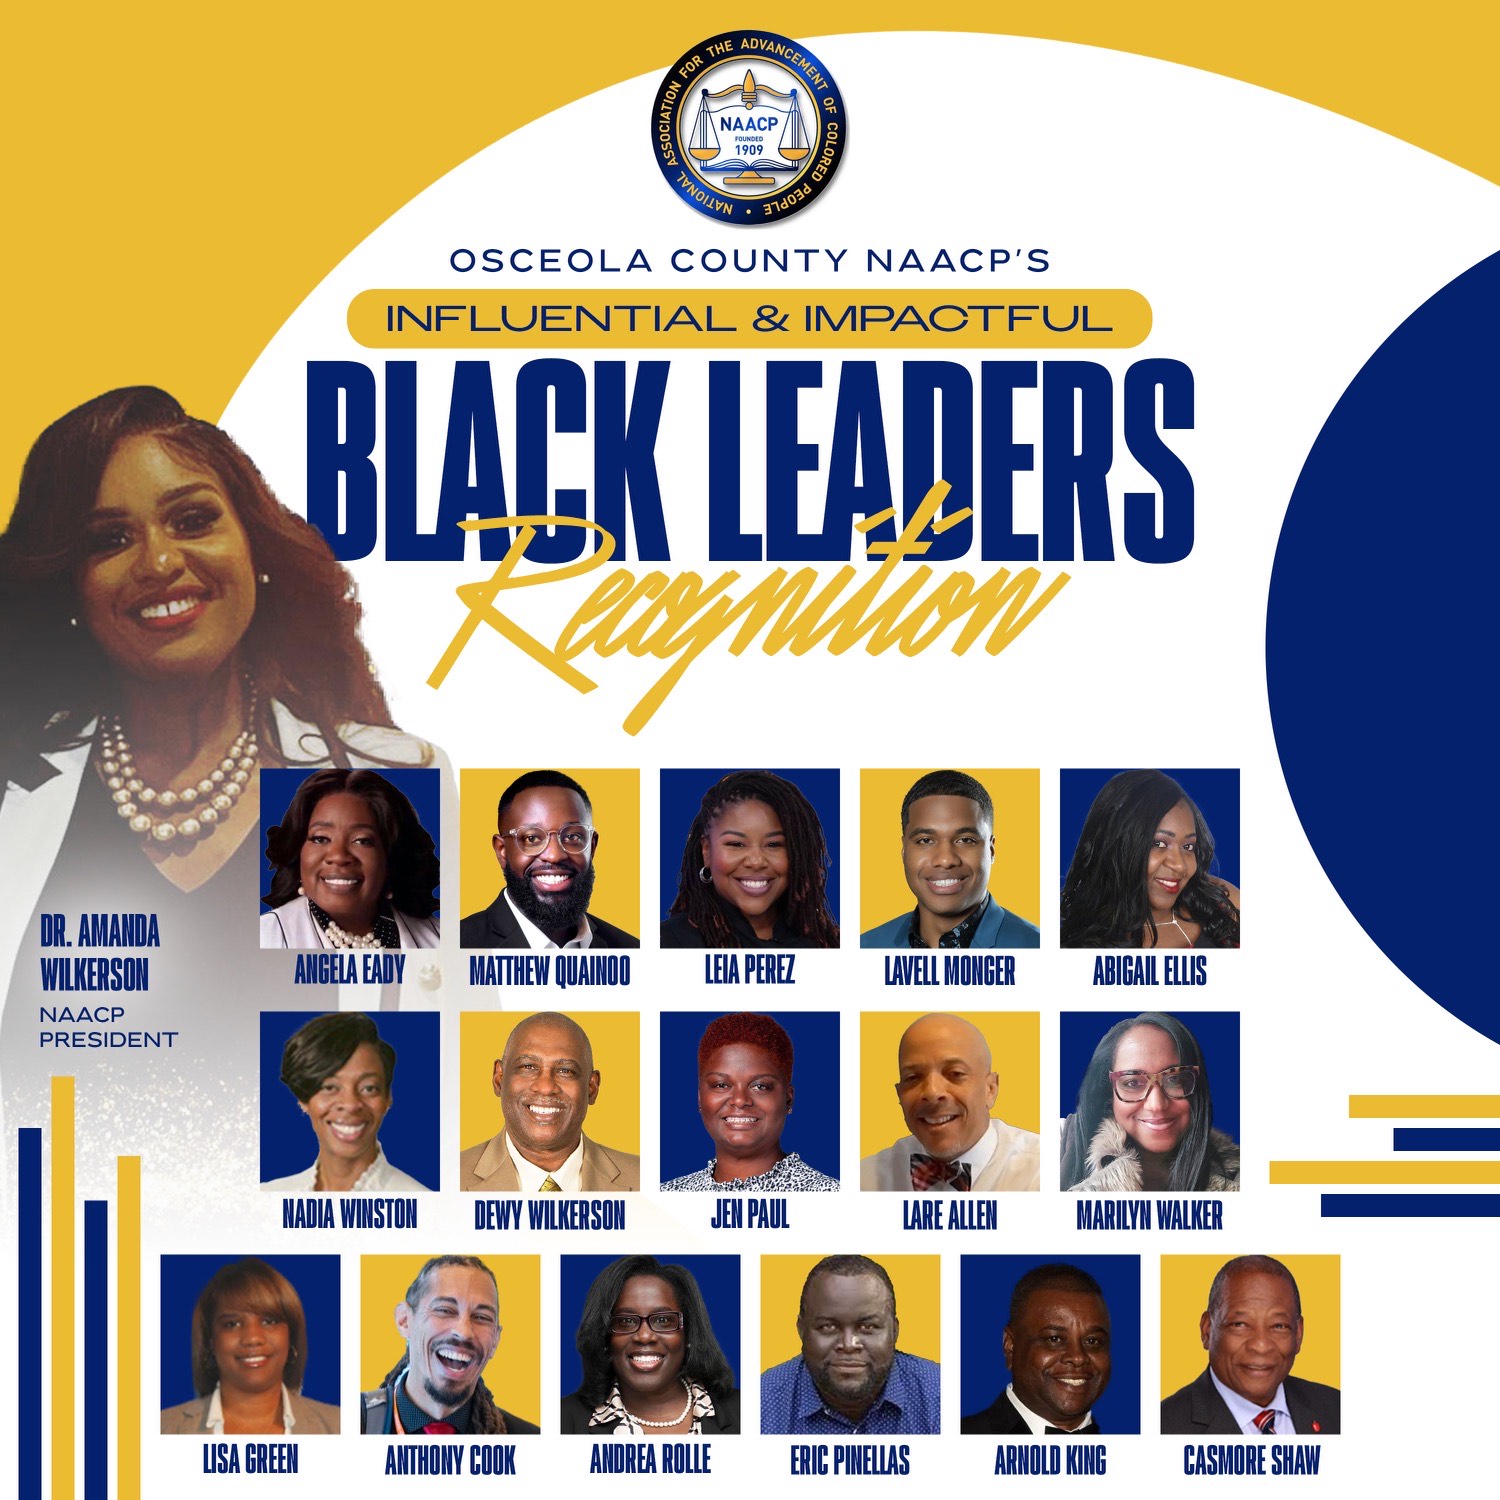 OSCEOLA COUNTY NAACP'S INFLUENTIAL & IMPACTFUL BLACK LEADERS RECOGNITION